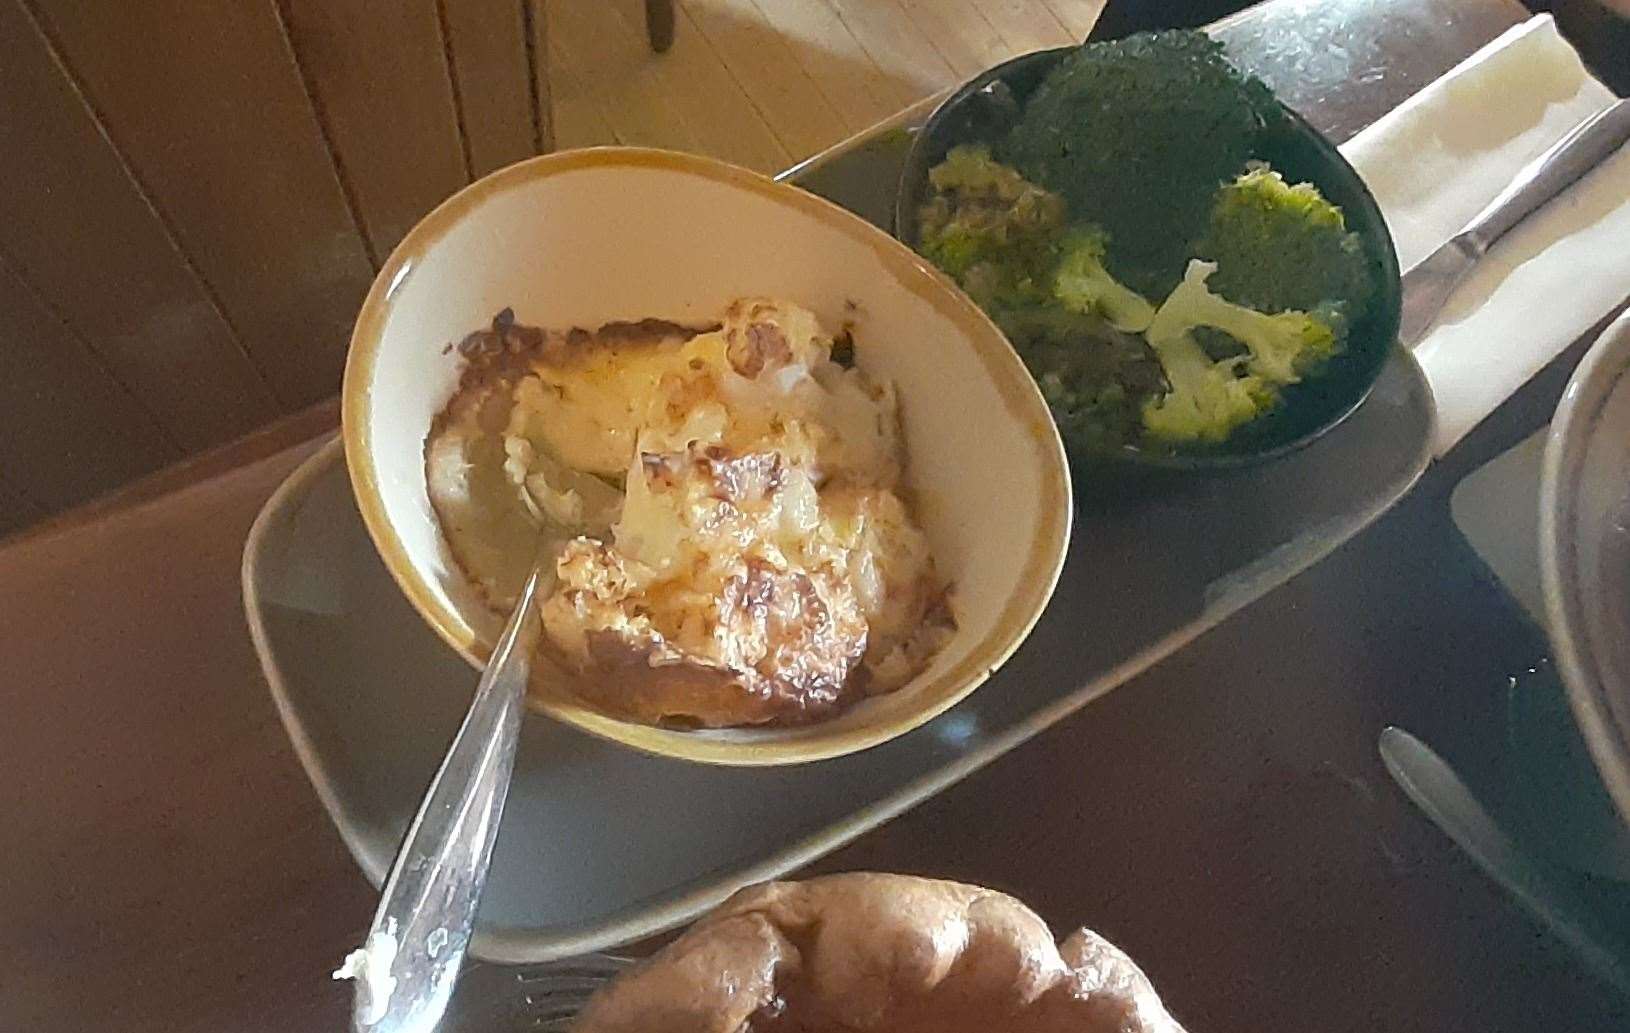 The Sunday lunch was accompanied by generous portions of cauliflower cheese and broccoli